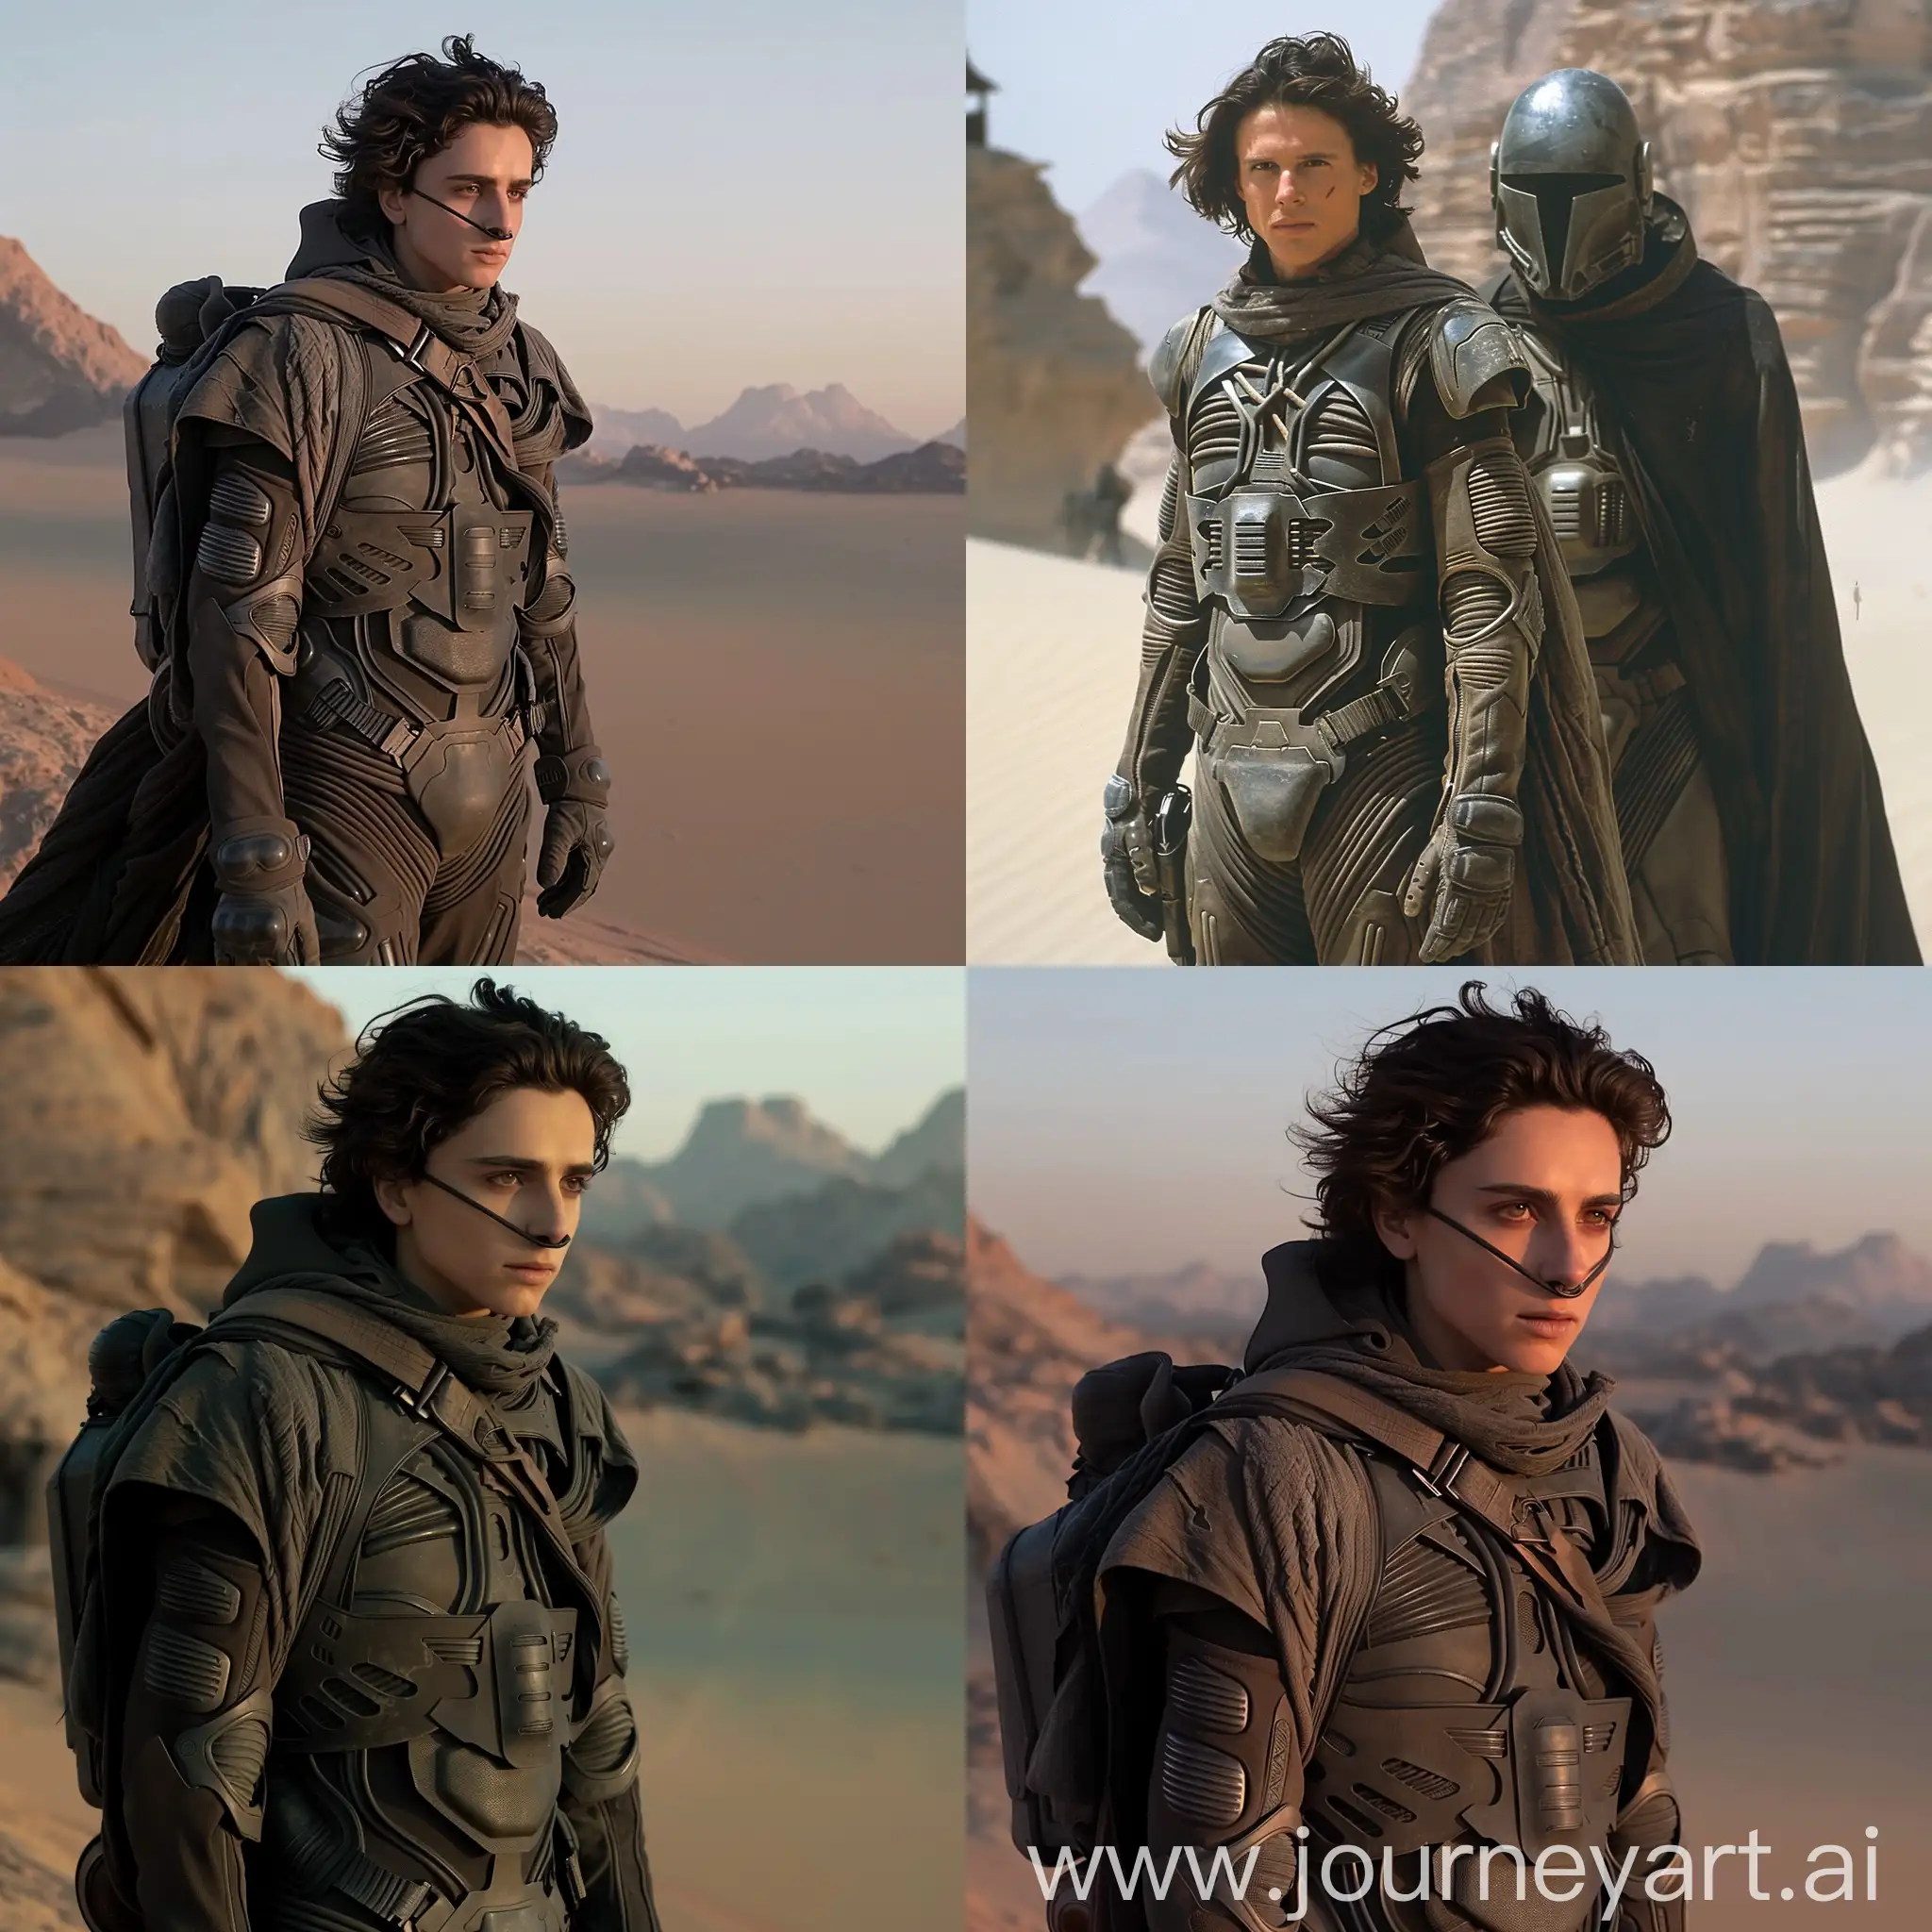 Dune-Movie-Scene-Epic-Desert-Landscape-with-Characters-in-Intriguing-Encounter